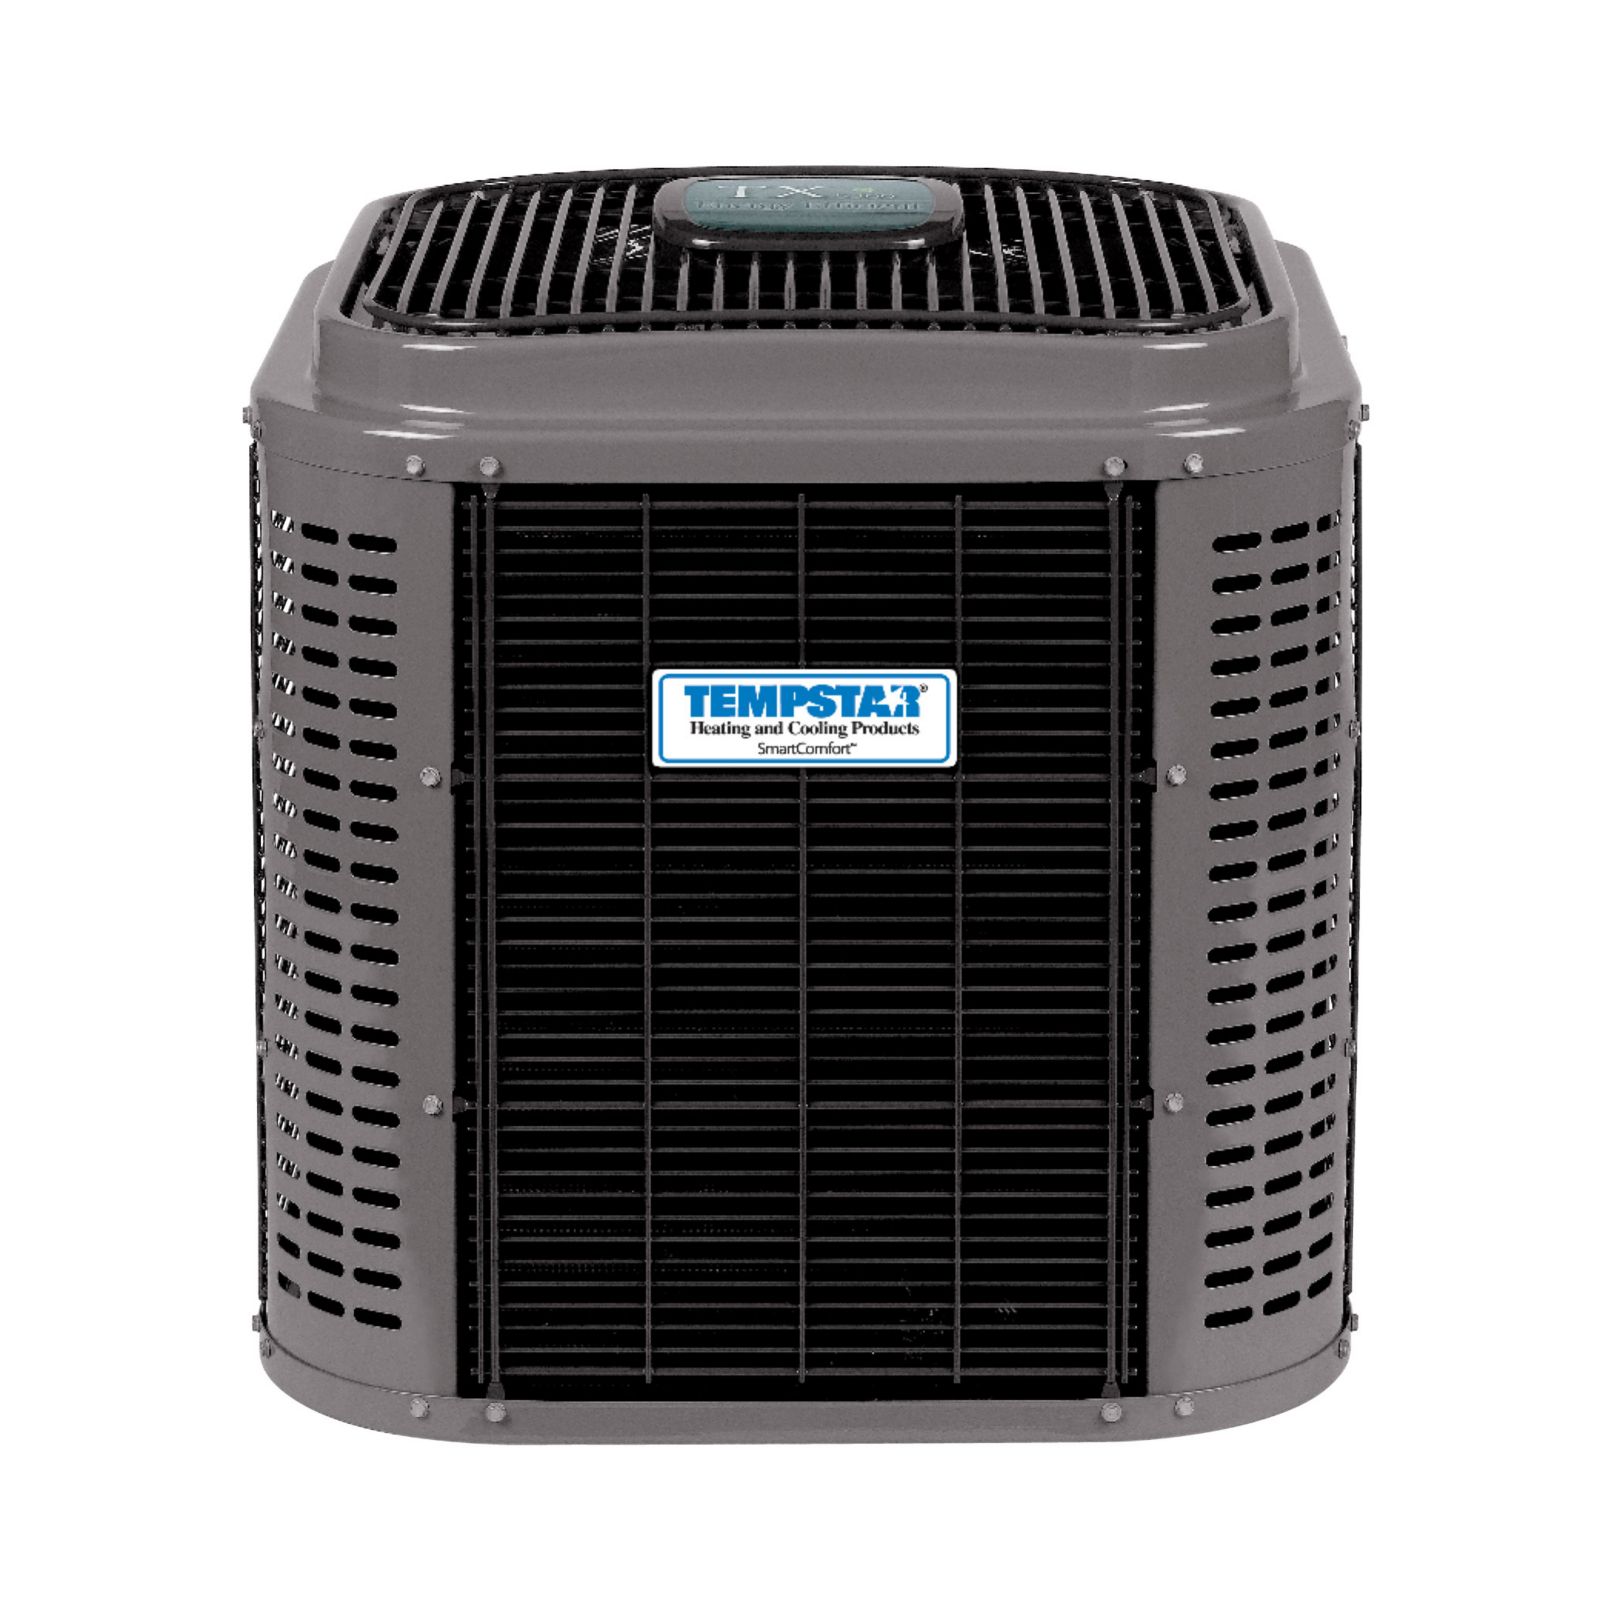 Tempstar TSA660GKA - 5 Ton, 16 SEER, R410A Single Stage Communicating Air Conditioner, 208/230-1-60, Coil Guard Grille